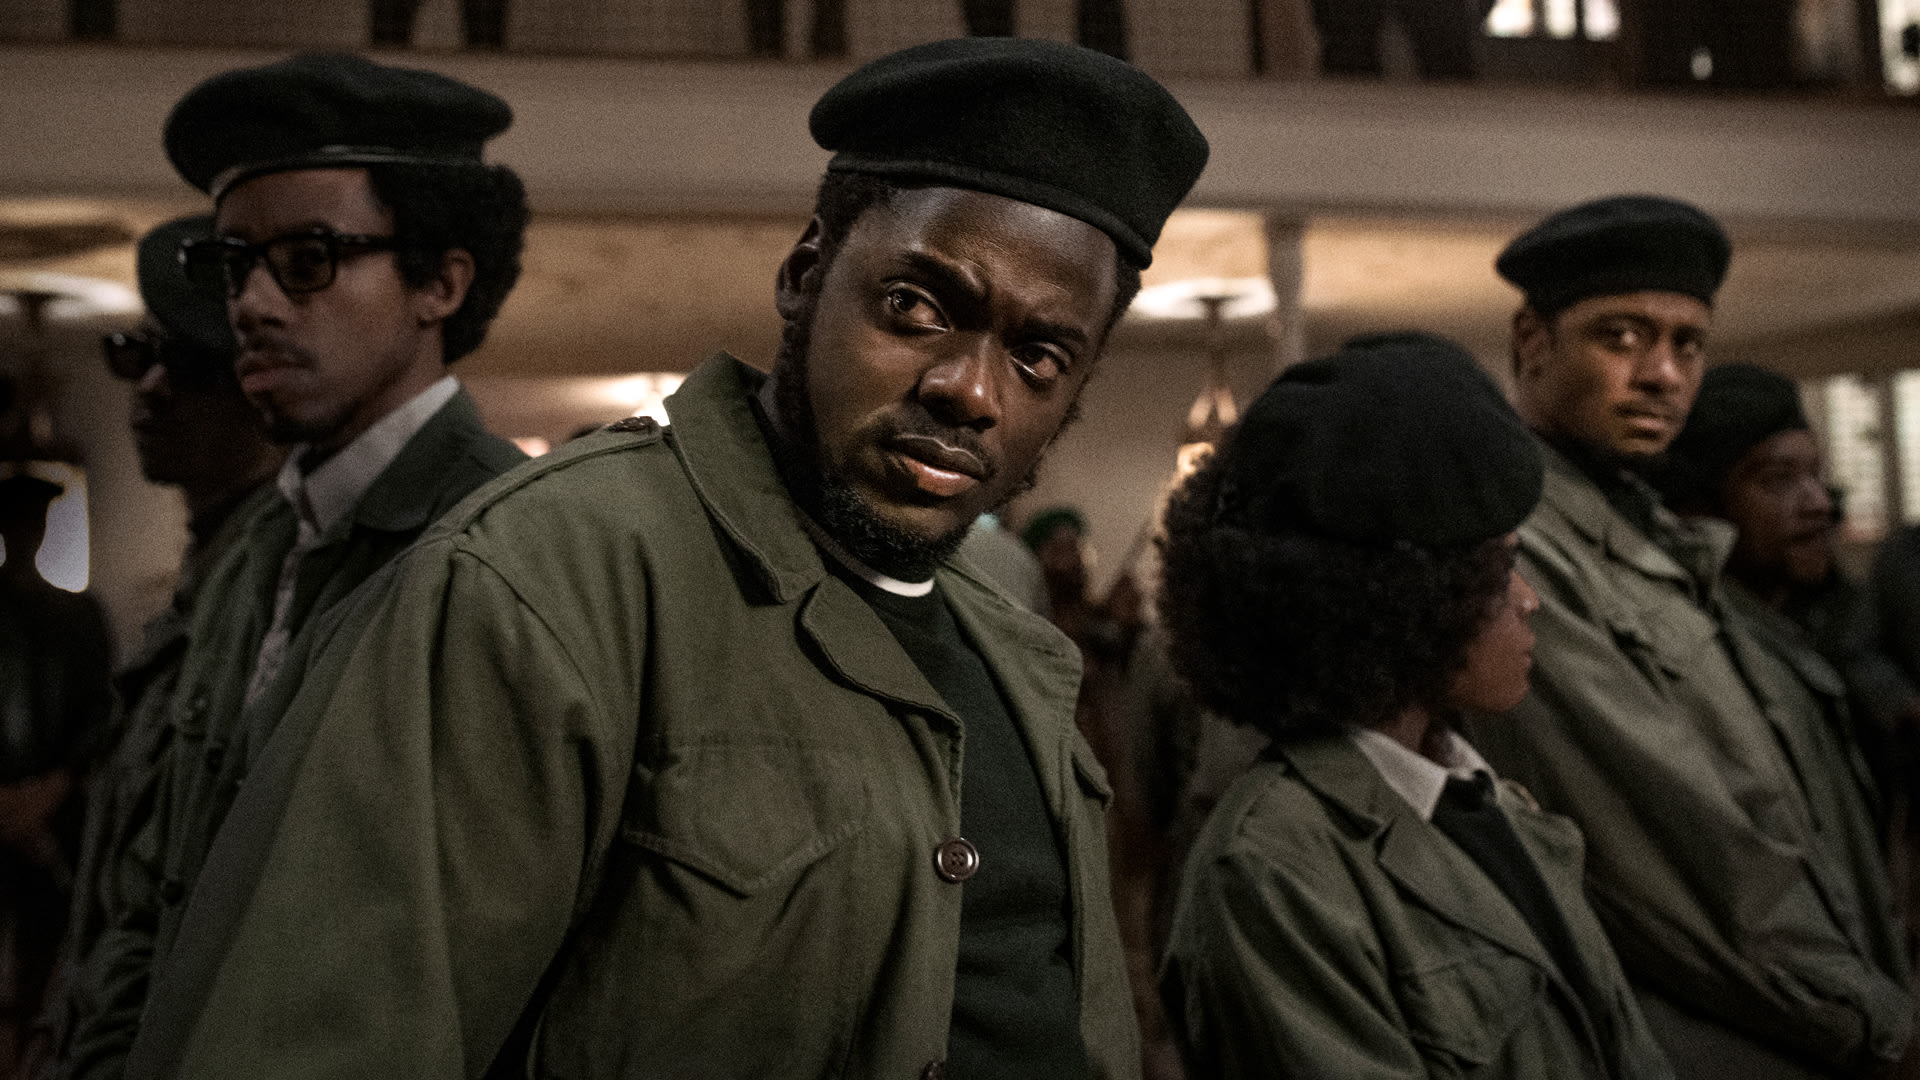 The true story behind the militantly radical, anti-cop thriller ‘Judas and the Black Messiah’